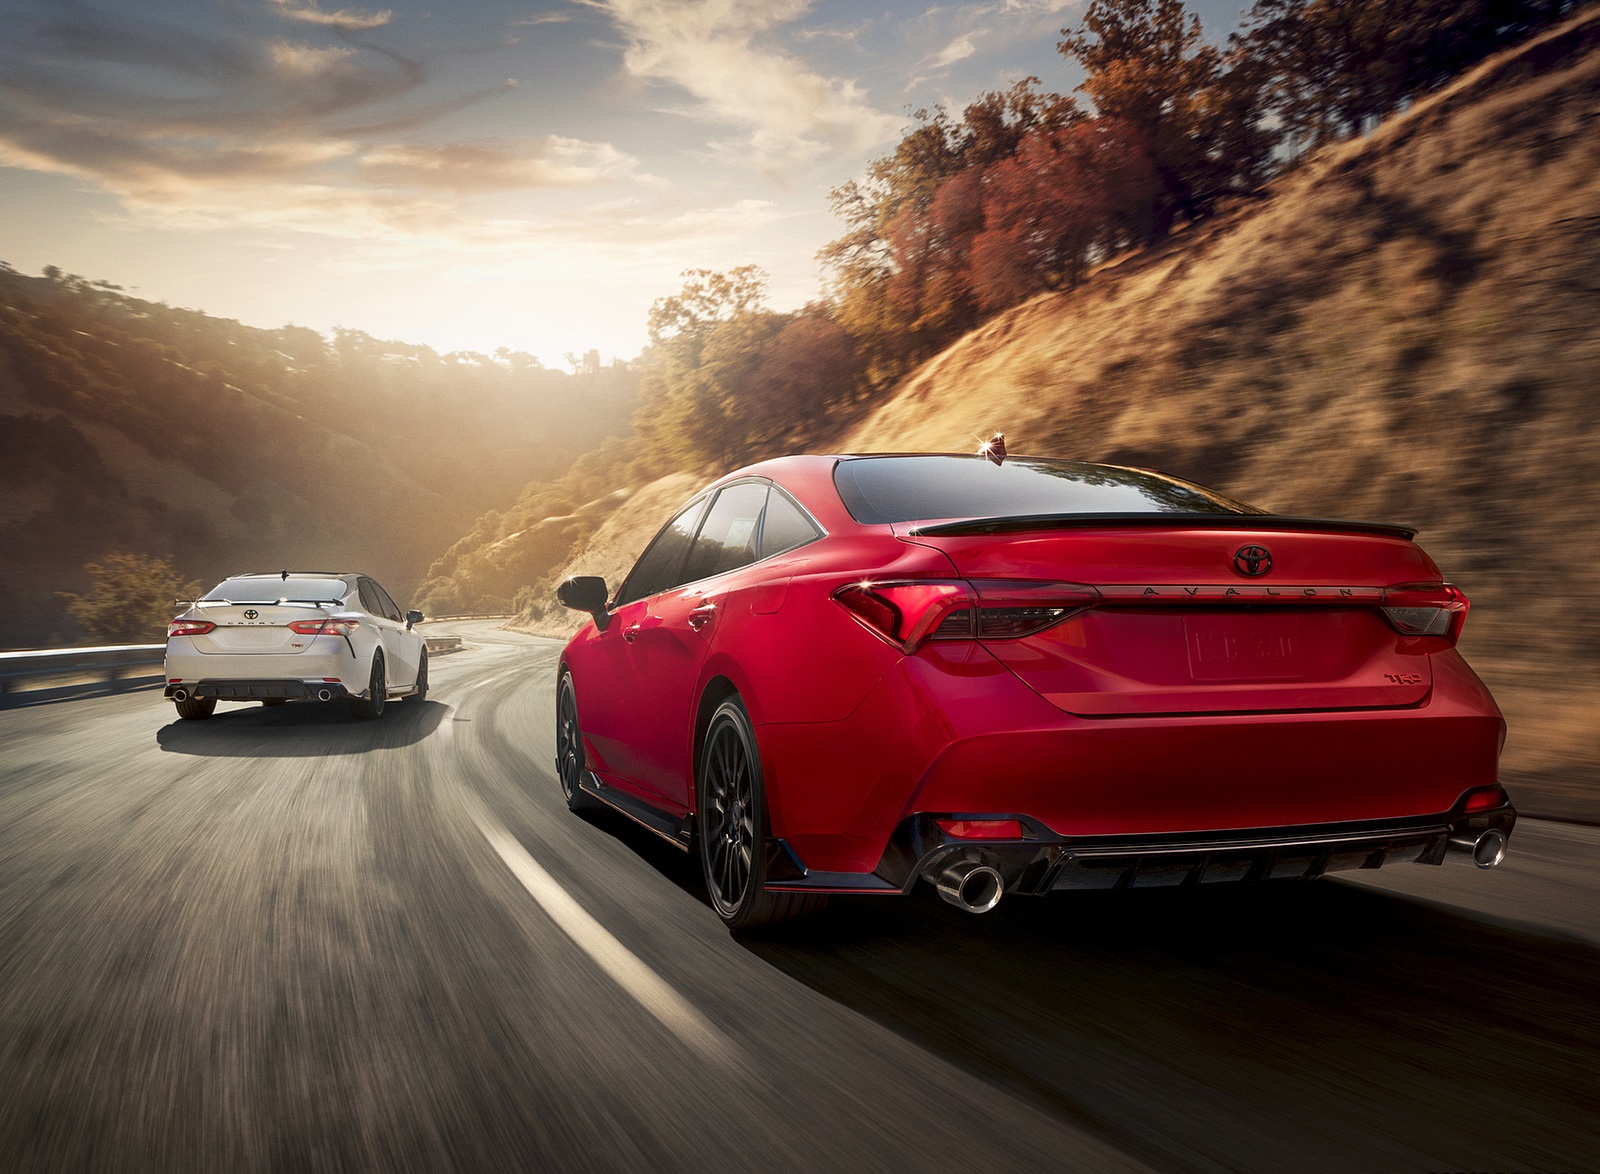 2020 Toyota Avalon TRD and Camry TRD Wallpapers (2)